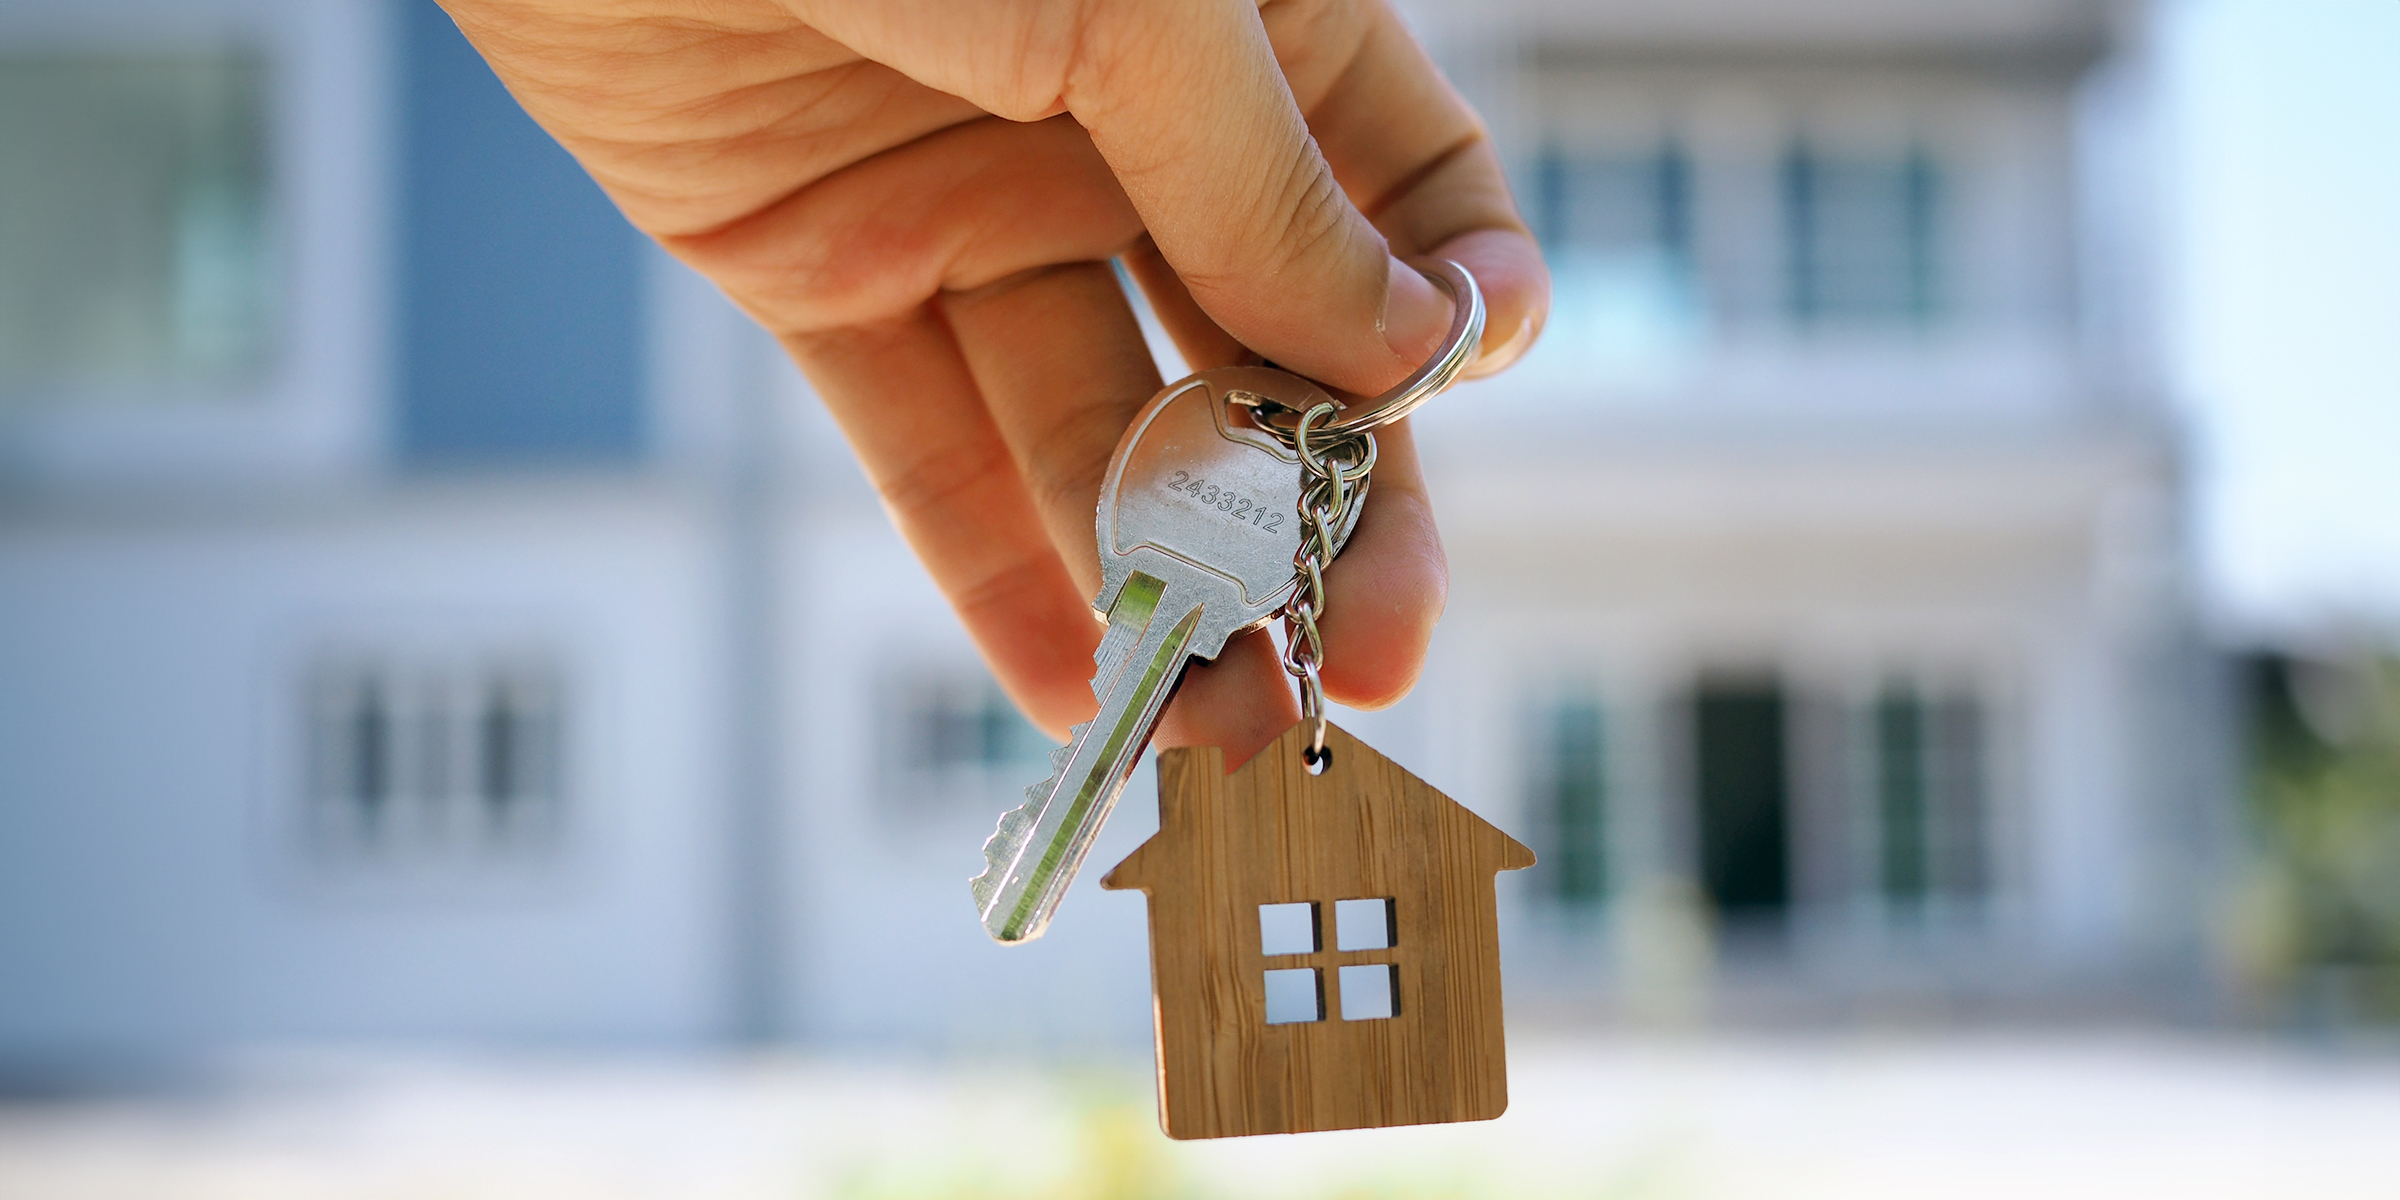 A person holding a house key | Source: Shutterstock